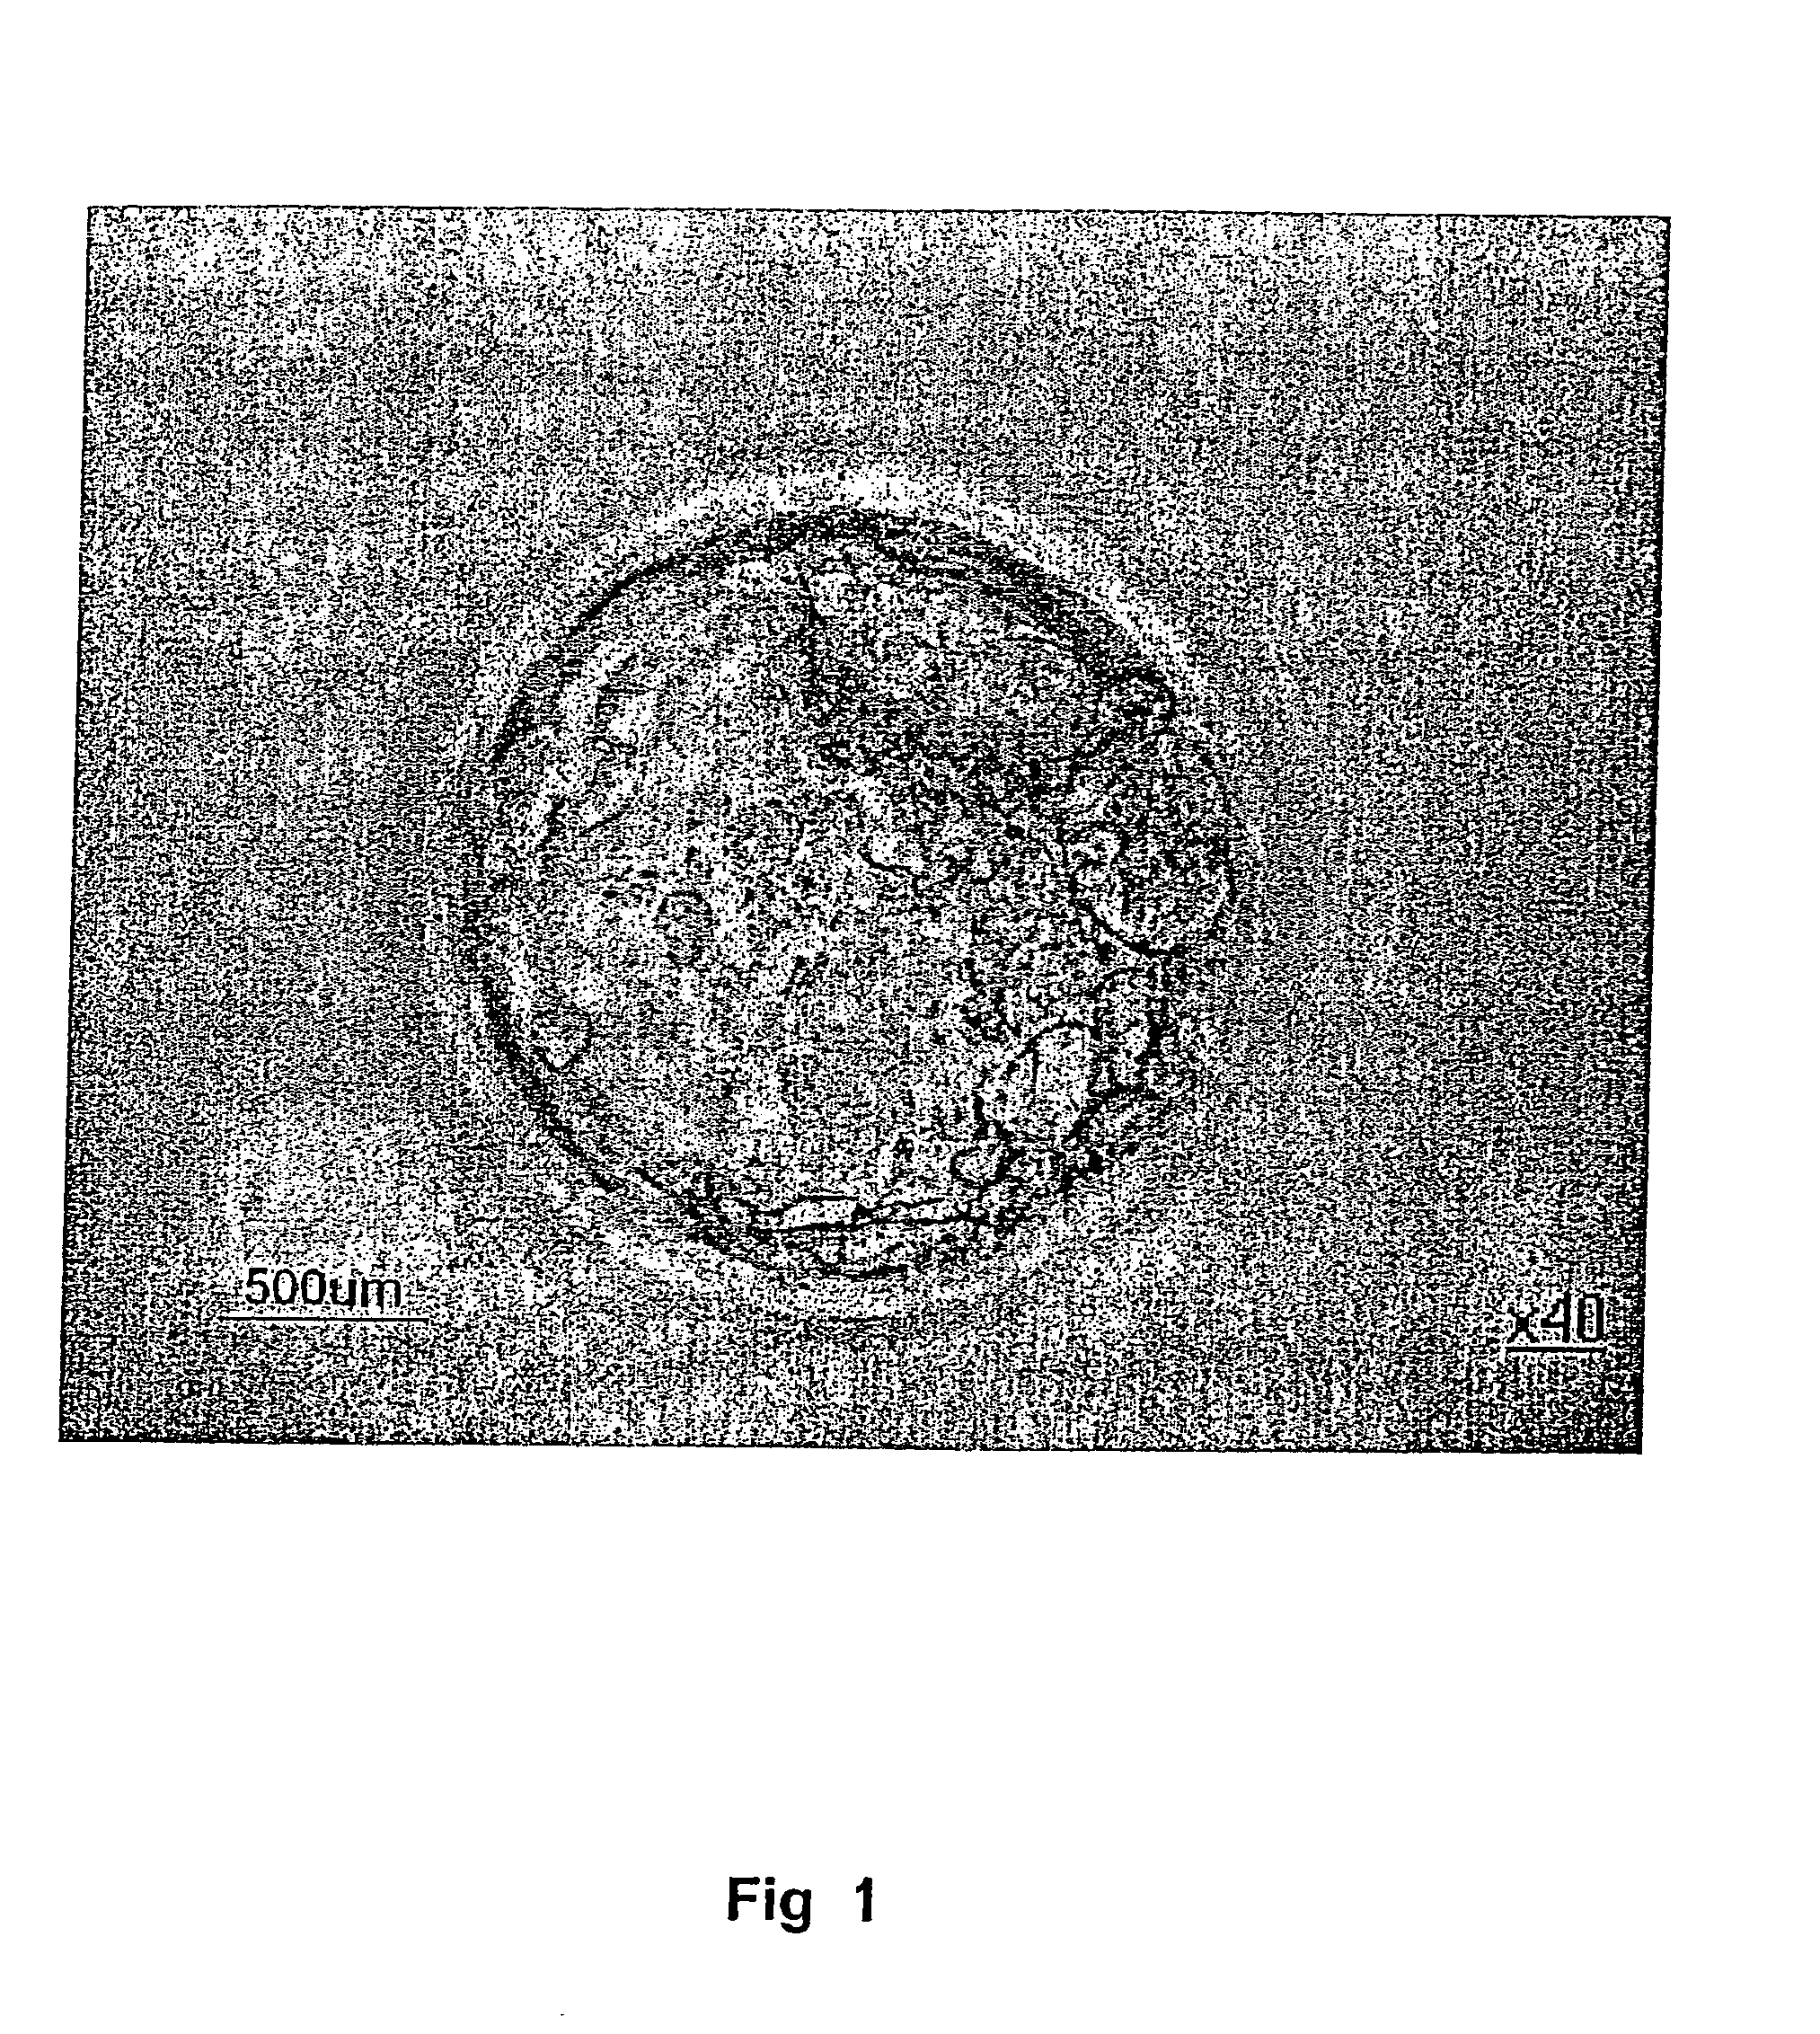 Method for the establishment of a pluripotent human blastocyst - derived stem cell line